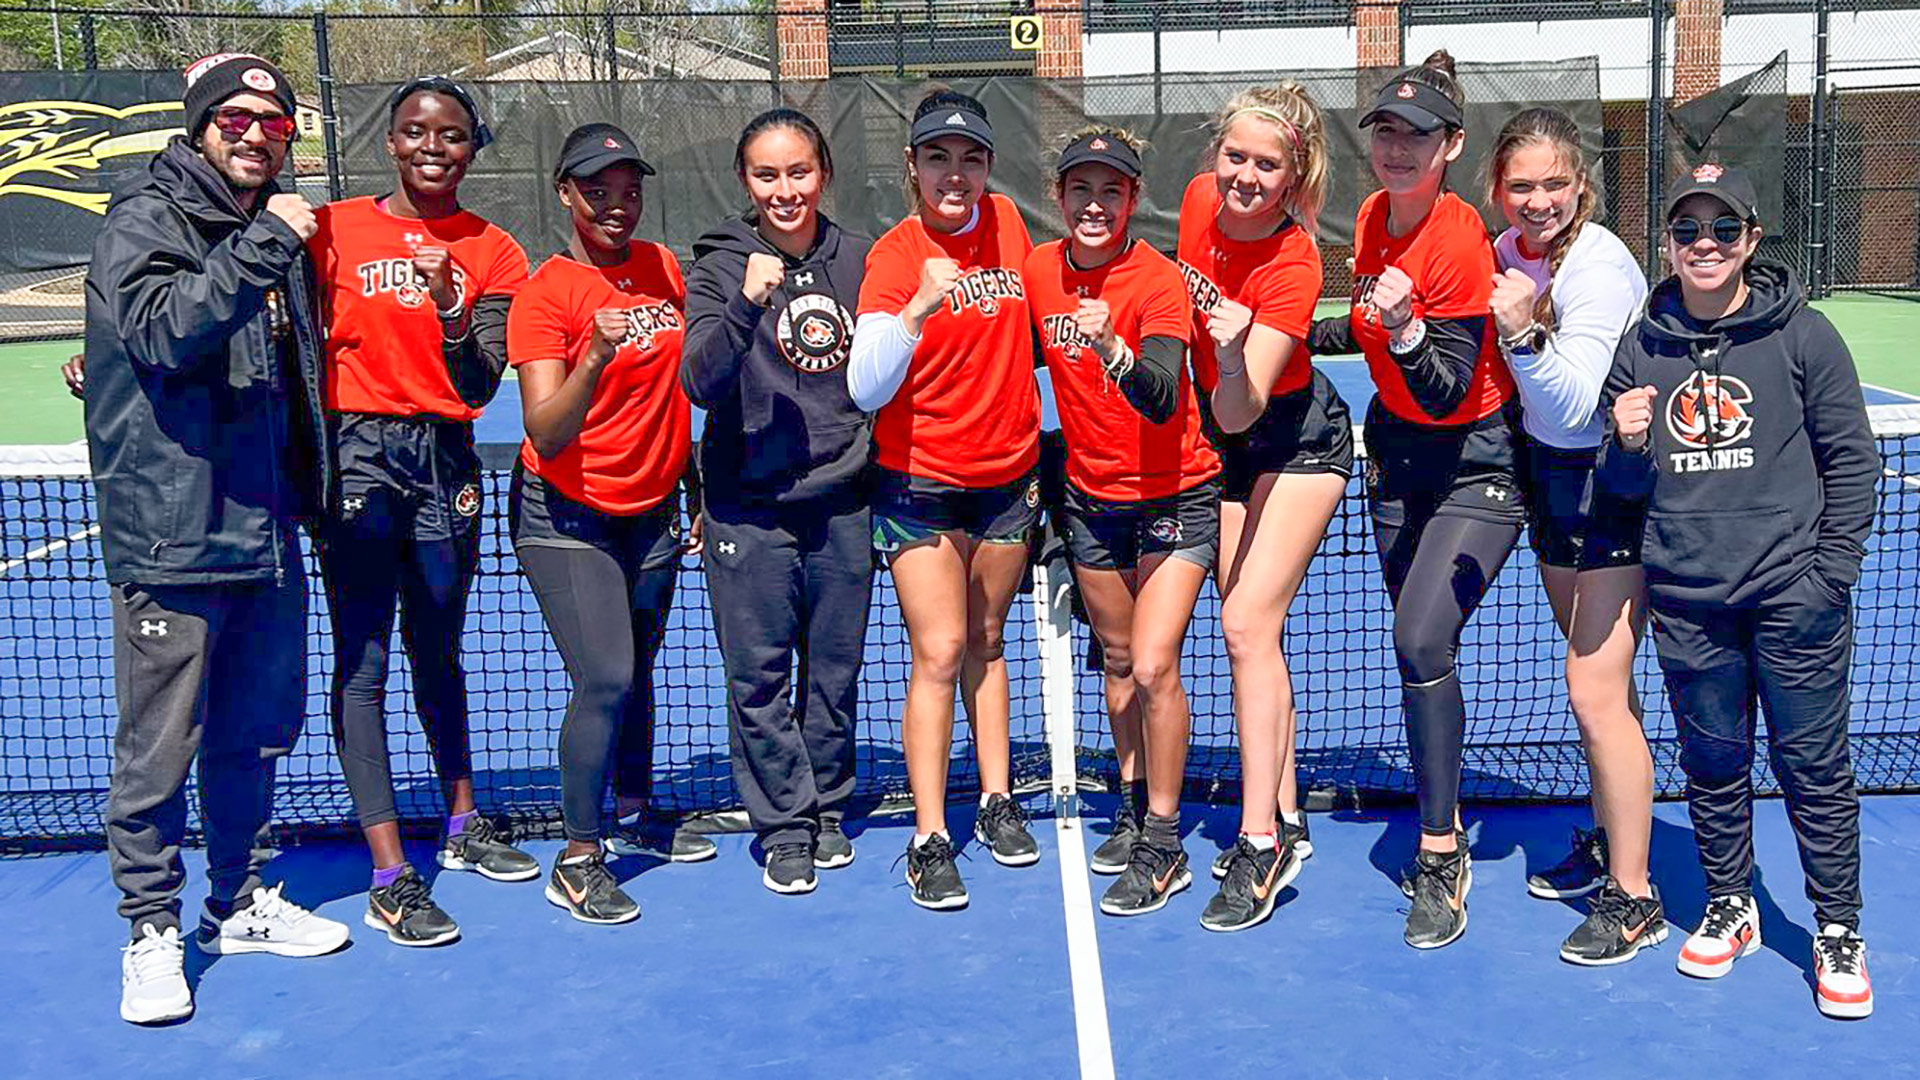 Tiger tennis teams impress in victories over ranked opponents